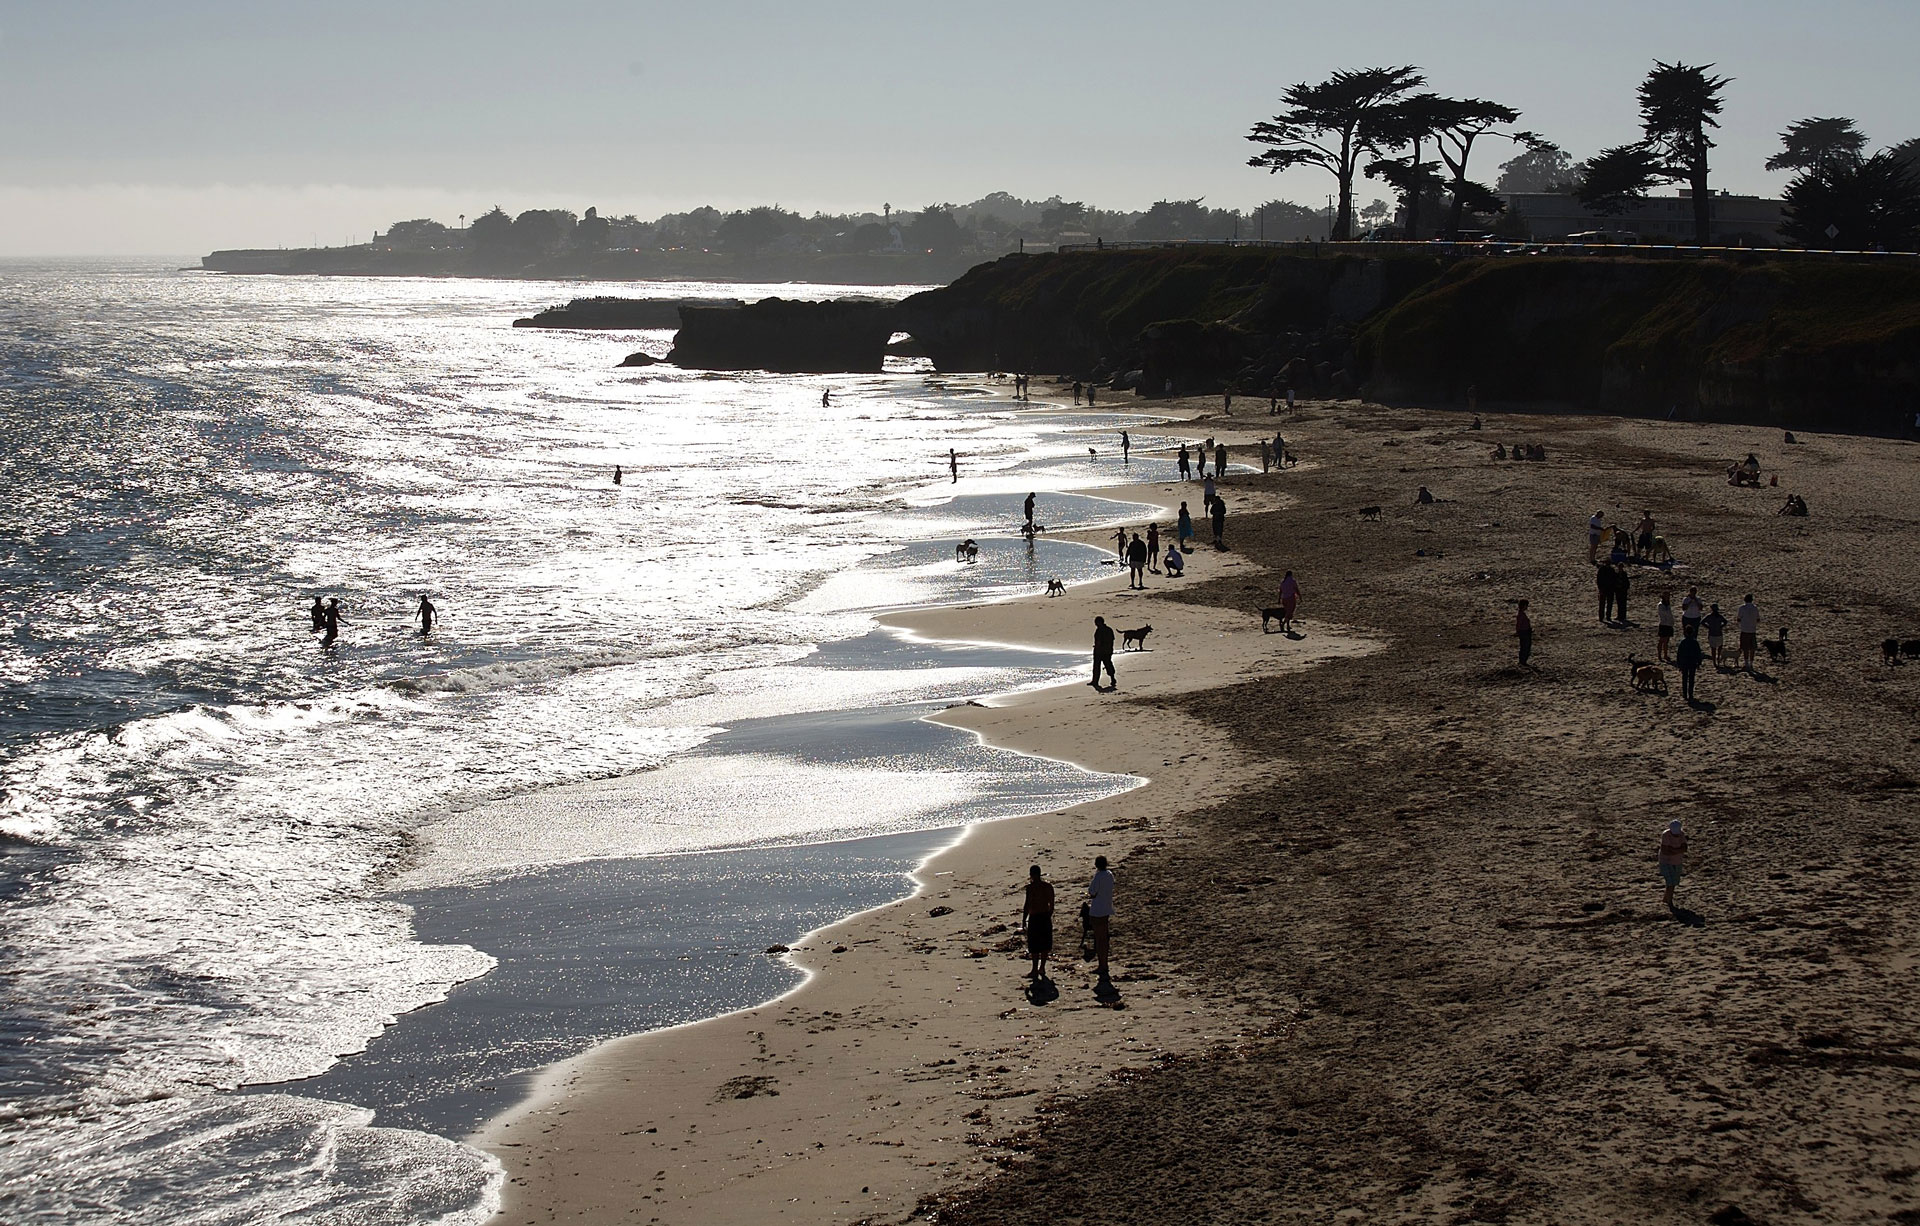 Visitors enjoy the beach below West Cliff Drive in Santa Cruz. Santa Cruz County has the second-highest poverty rate in the state, after Los Angeles.